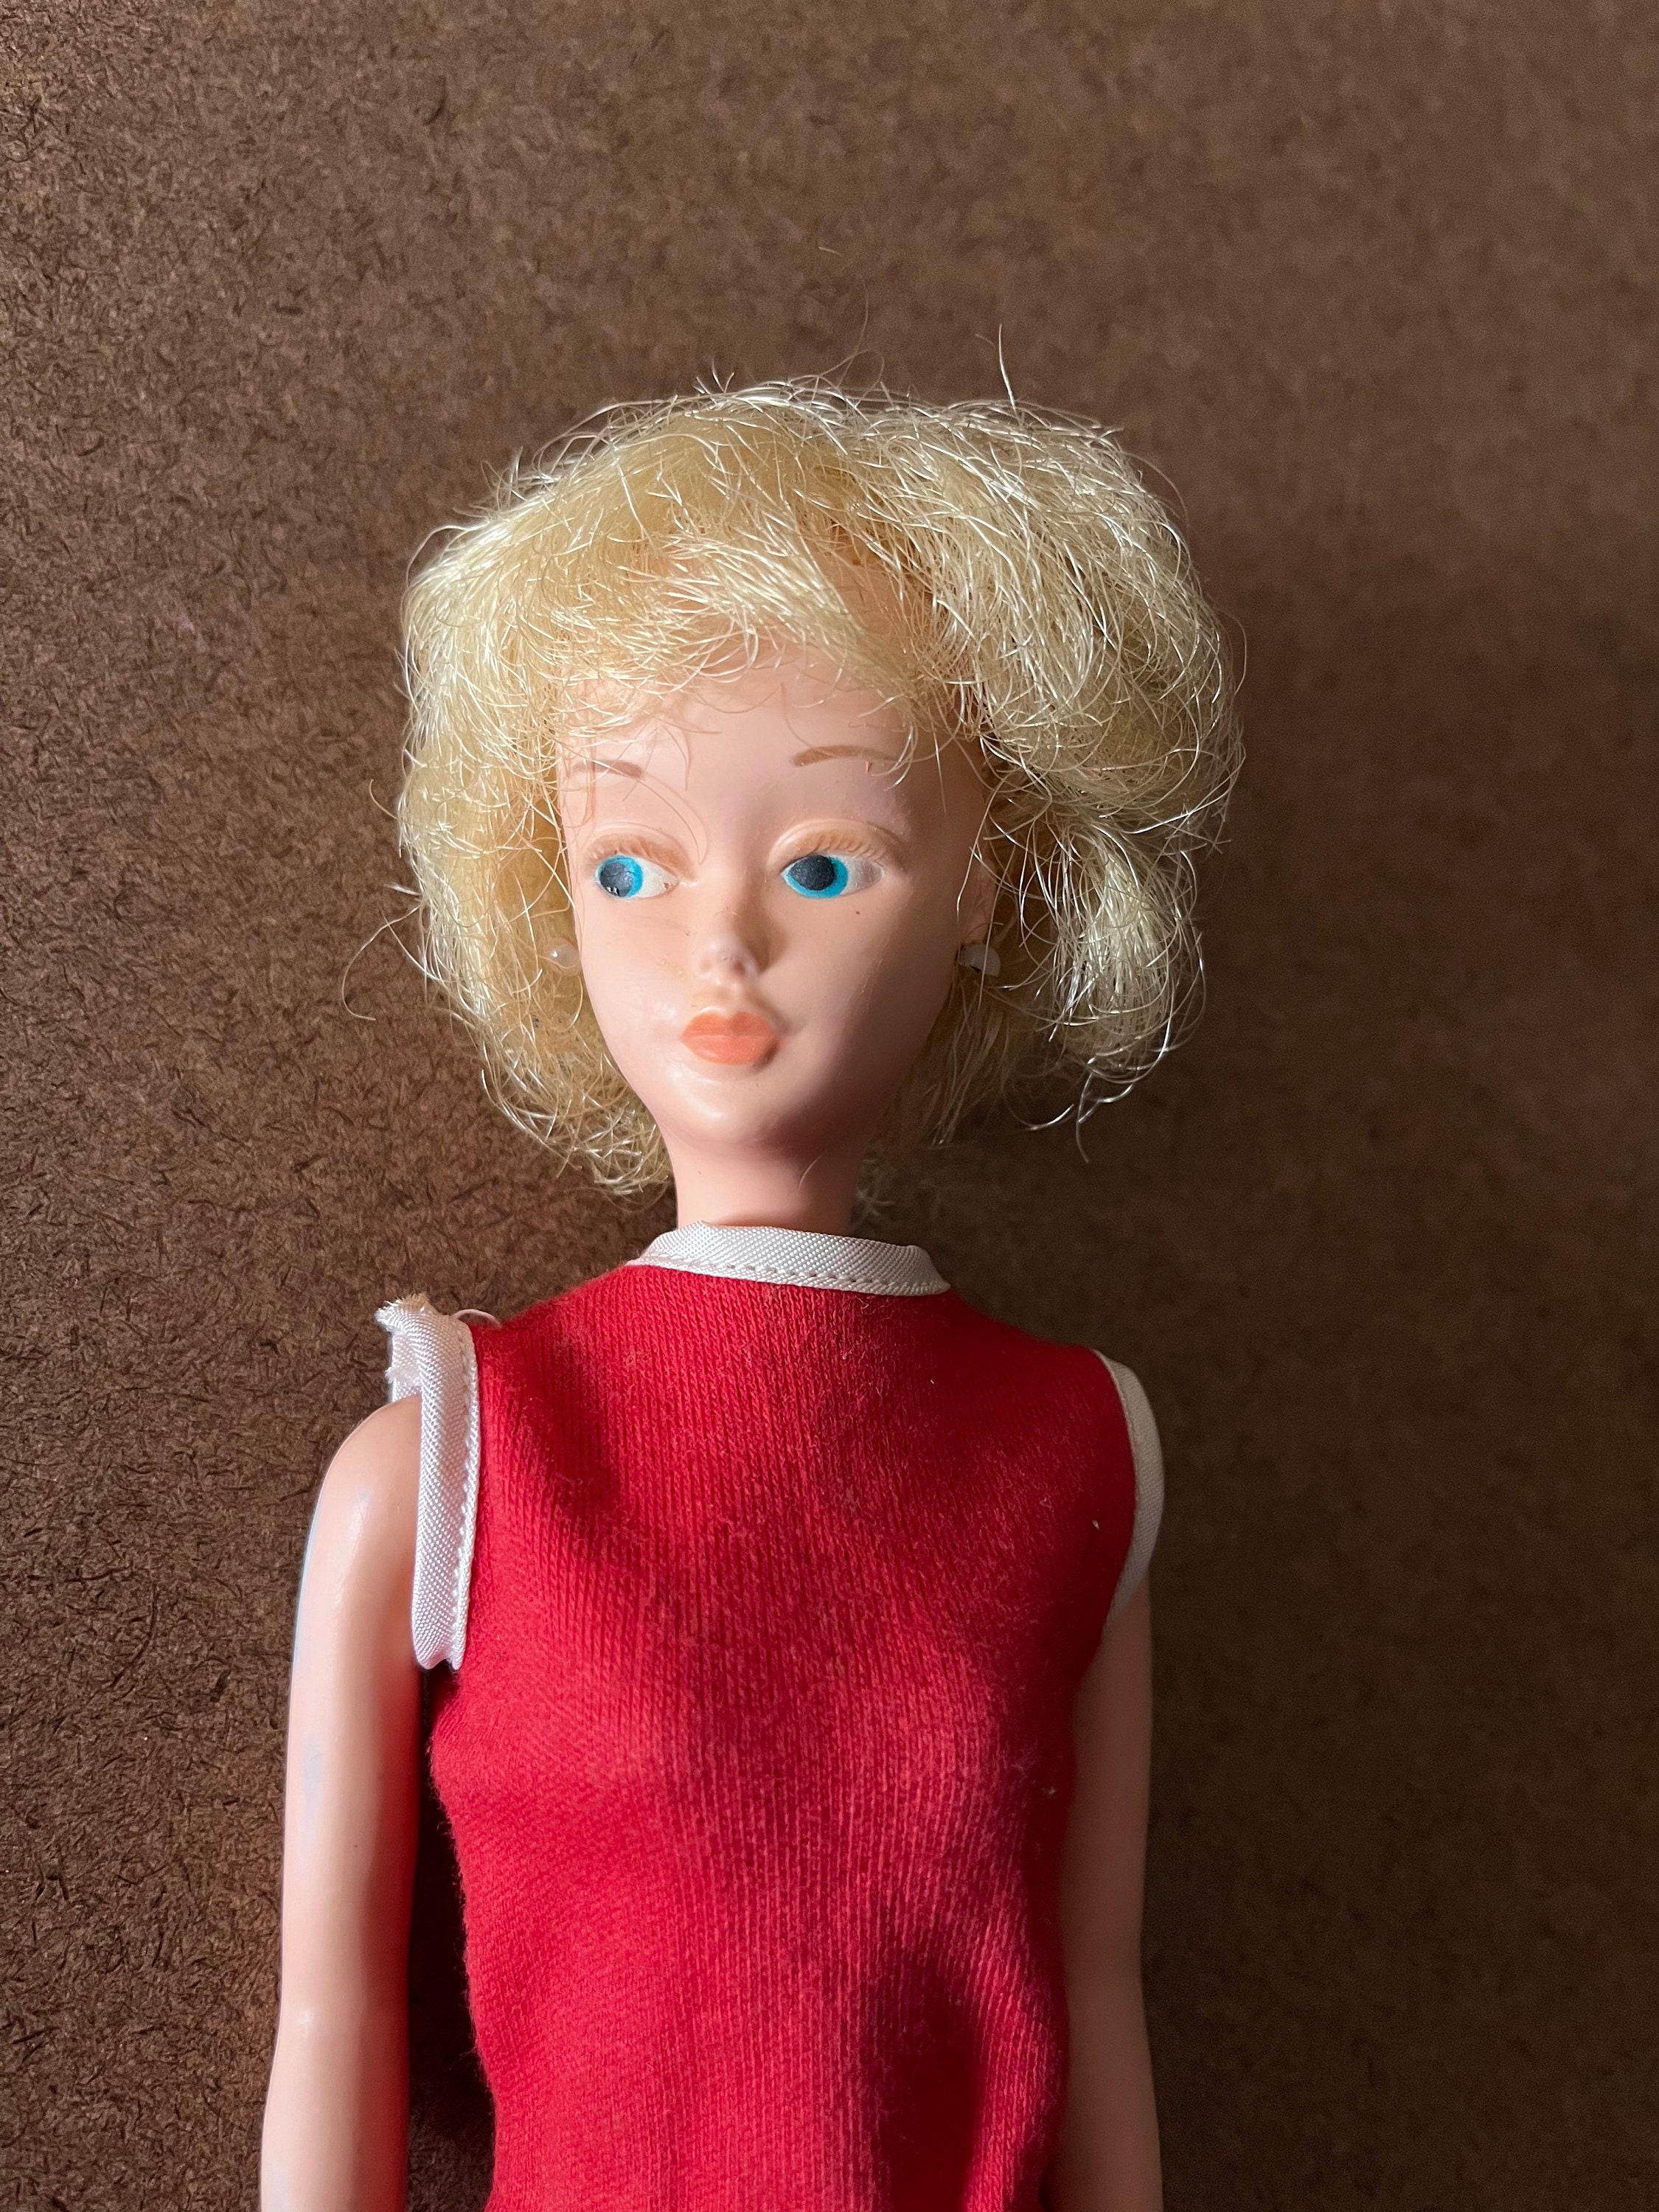 Beautiful Vintage 1950s Mary Makeup Doll - Tressy's Friend